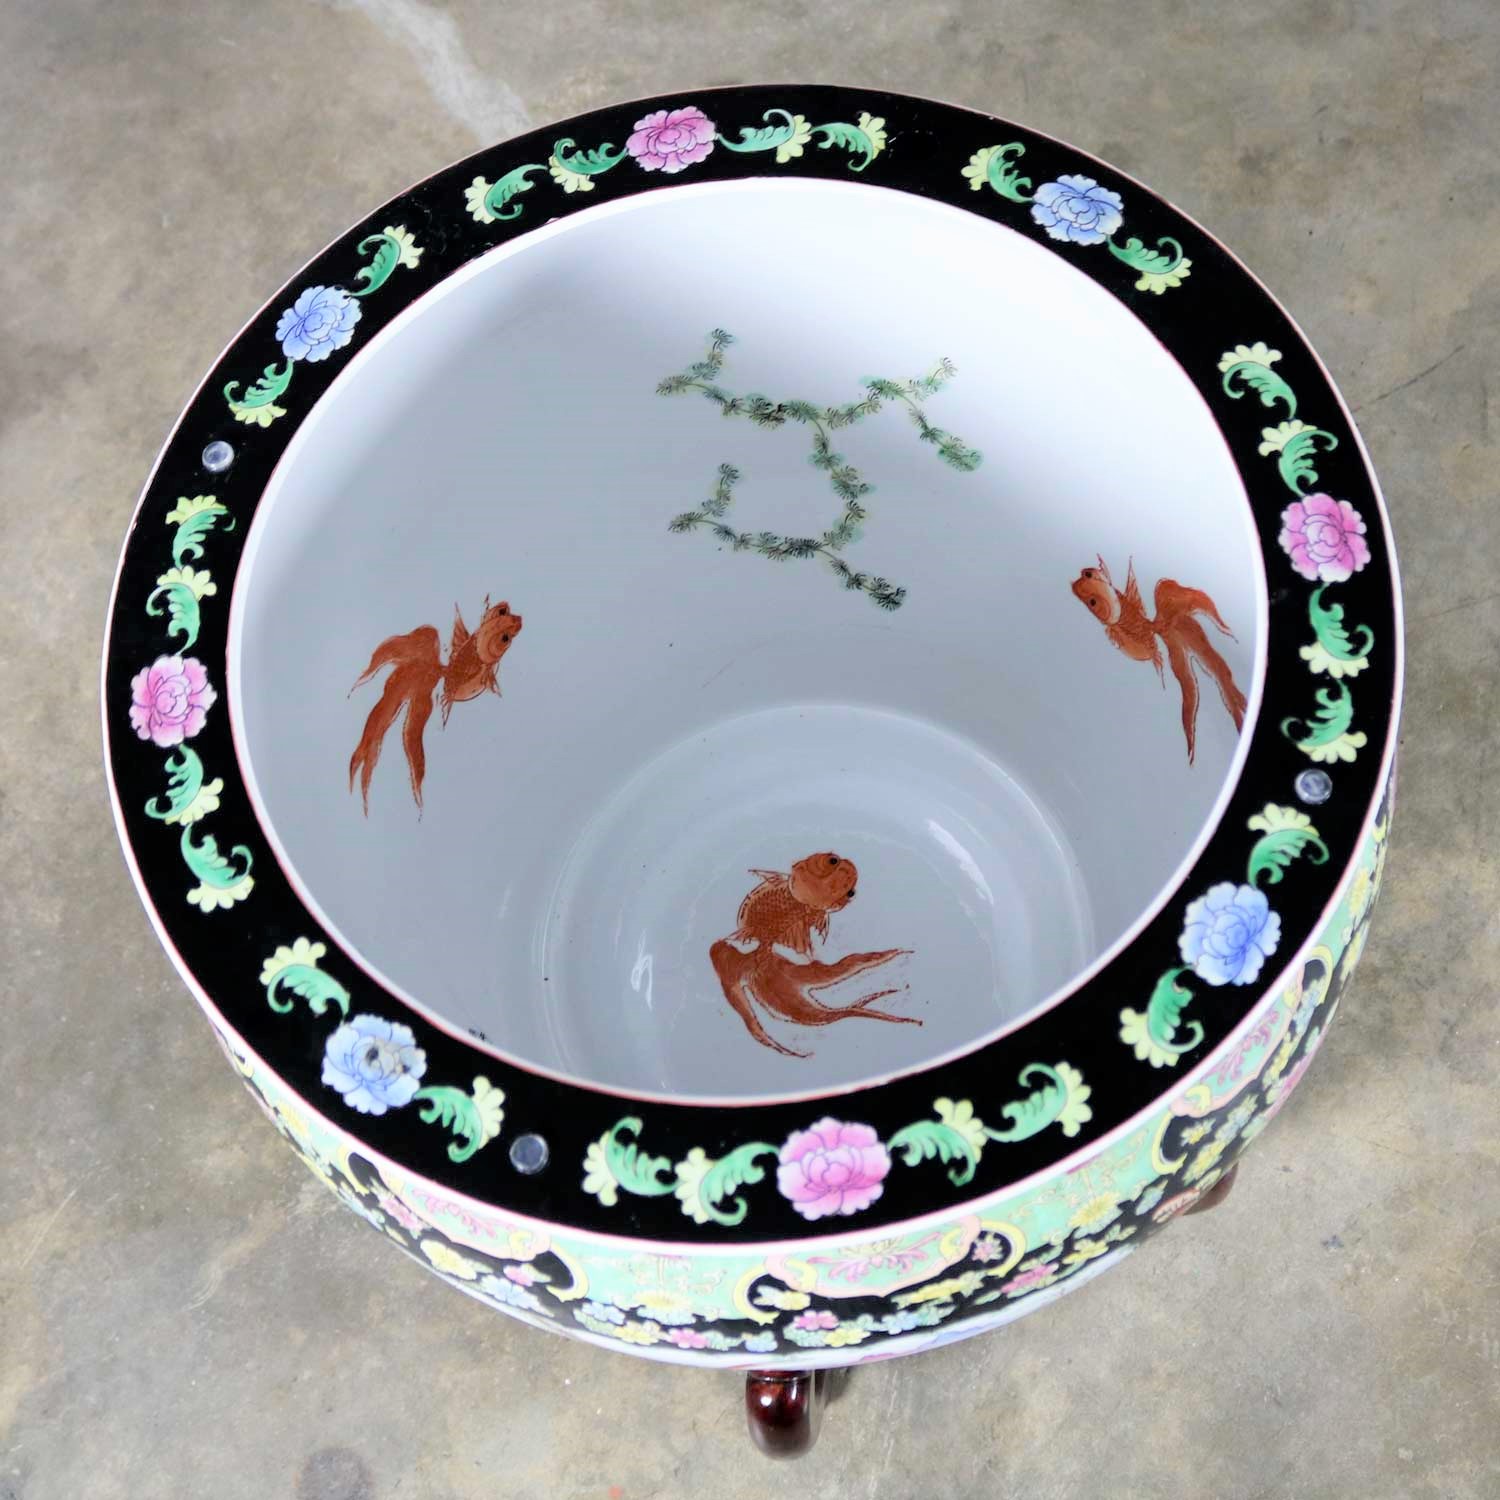 Chinese Porcelain Fish Bowl on Stand with Round Glass Top as Dining or Center Table